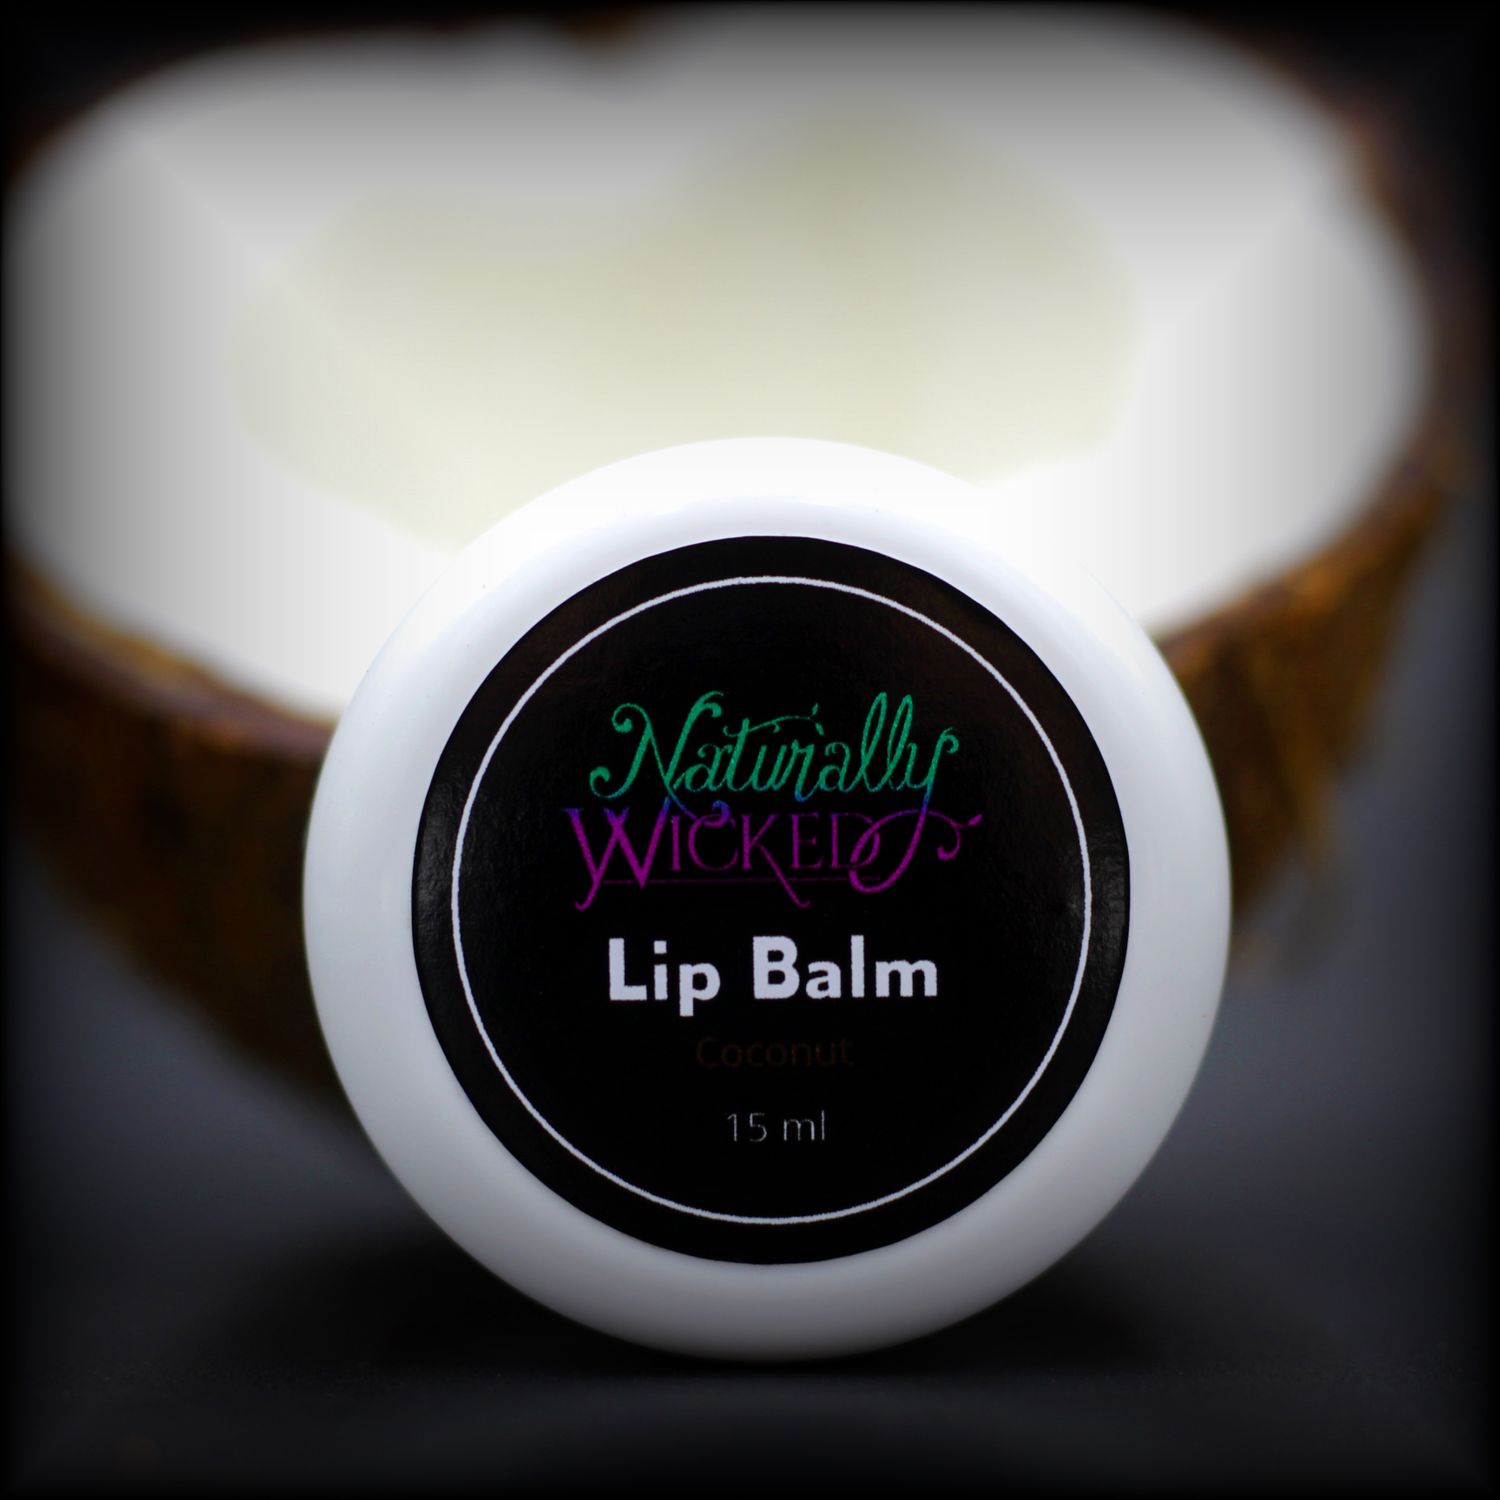 Naturally Wicked Coconut Lip Balm In Front Of Coconut With Visible Husk & Coconut Meat